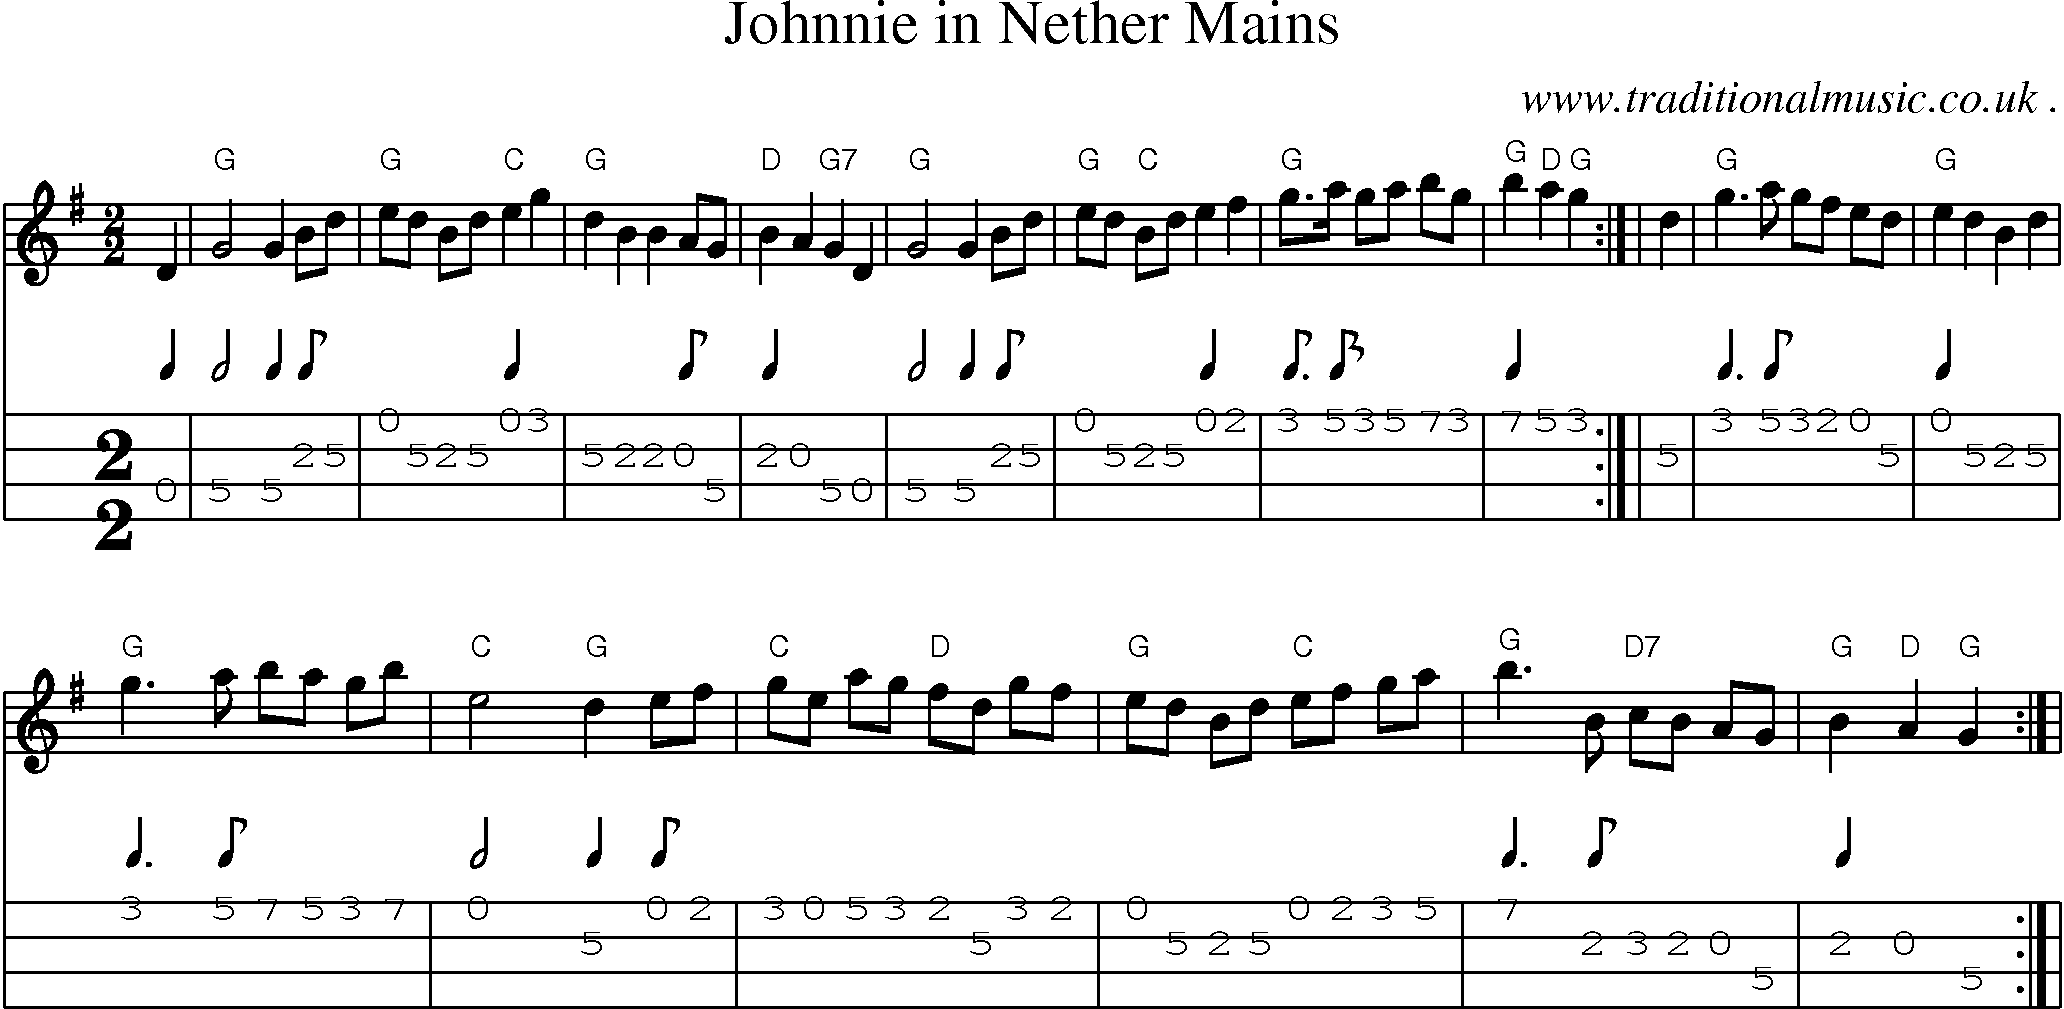 Sheet-music  score, Chords and Mandolin Tabs for Johnnie In Nether Mains